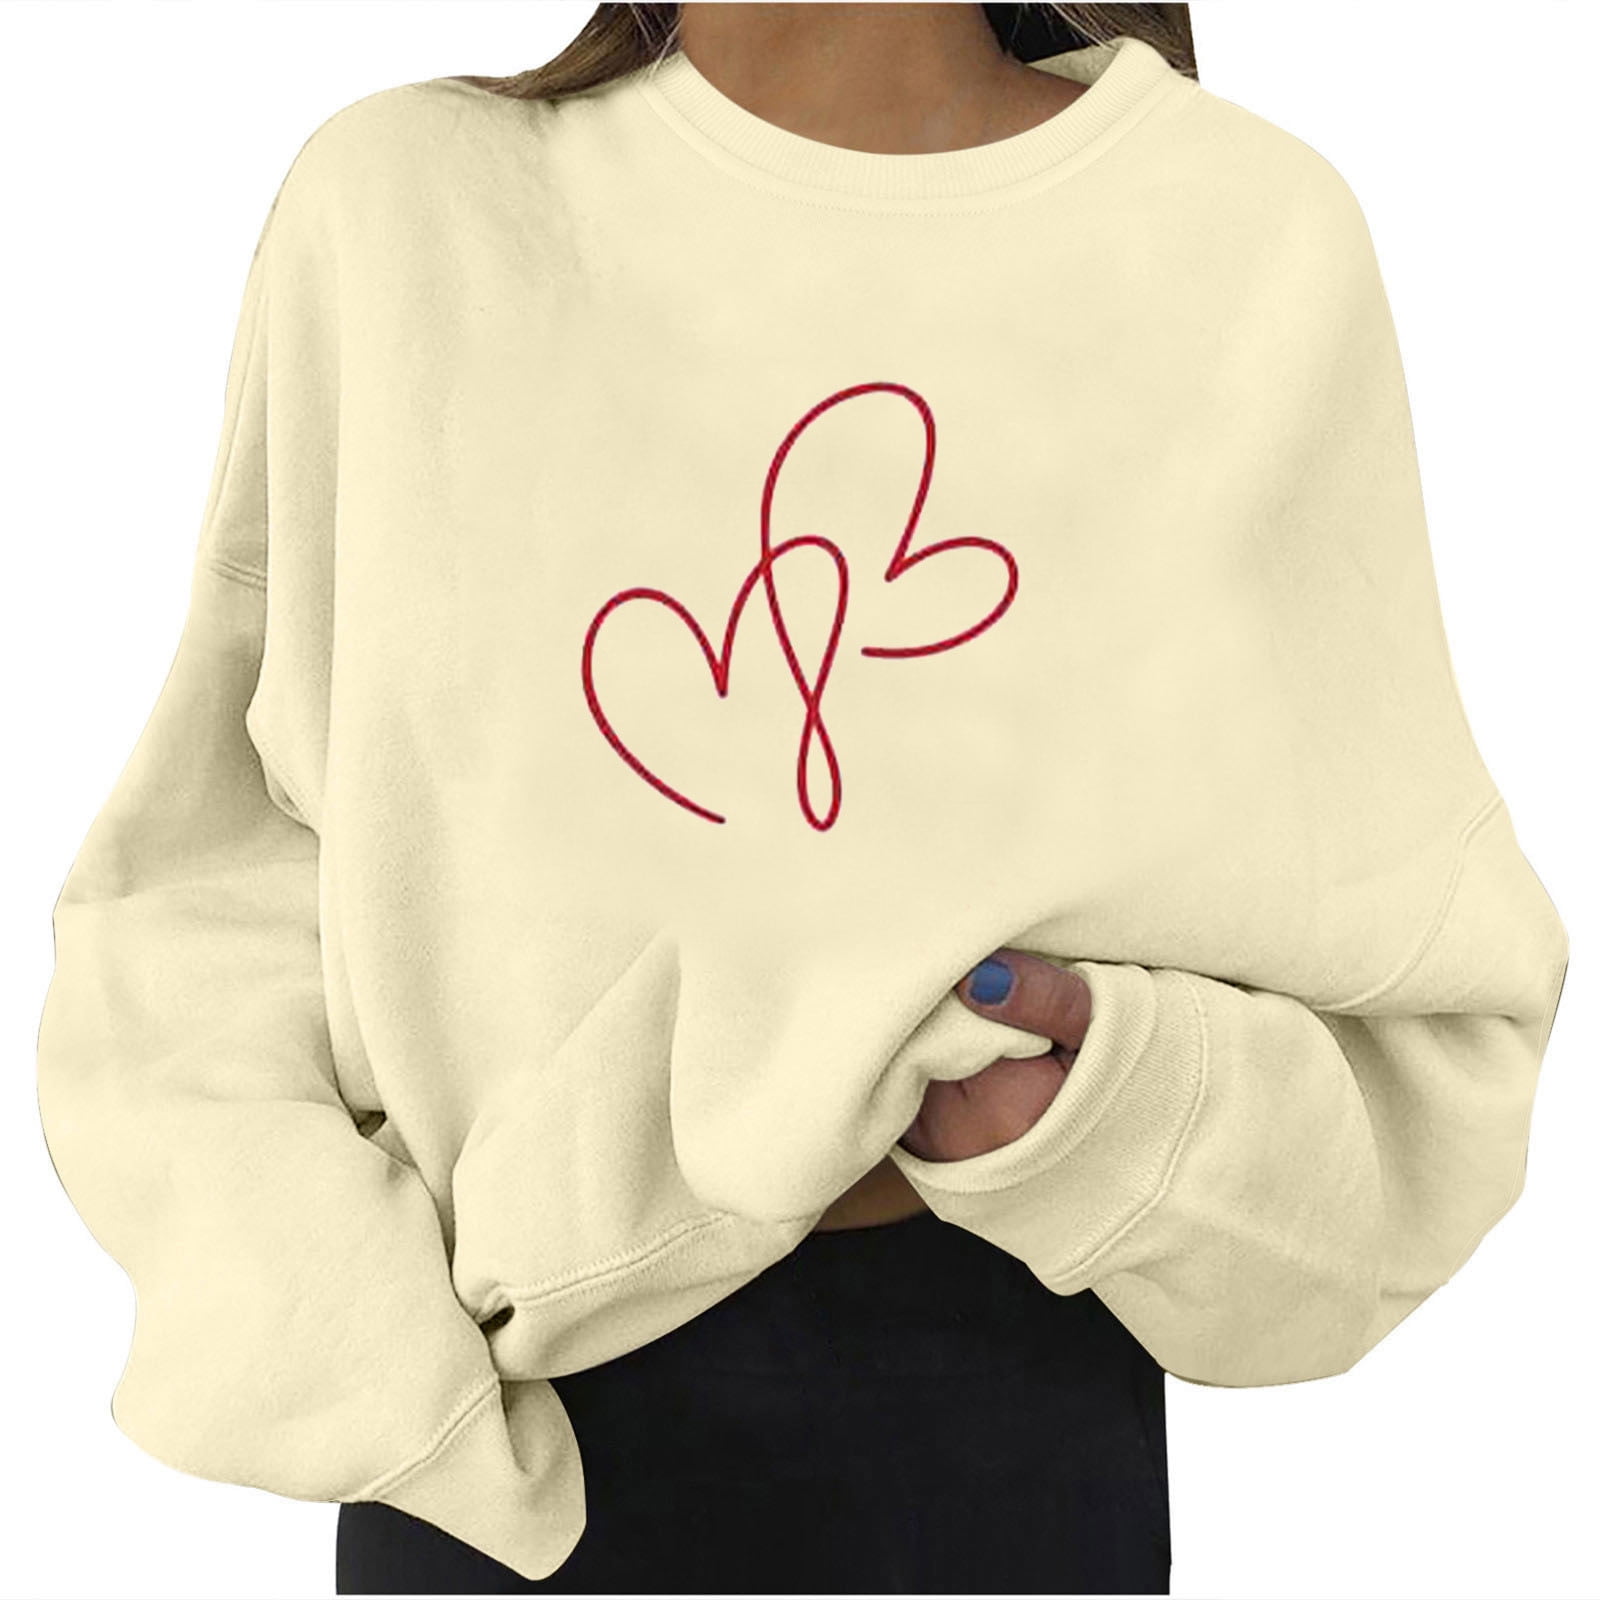 Korean Style Soft Cotton Basketball Hoodies For Women Large Size, Long  Sleeve, Letter Printed, Leisure Pullover Sweatshirts From Jxkangye, $6.63